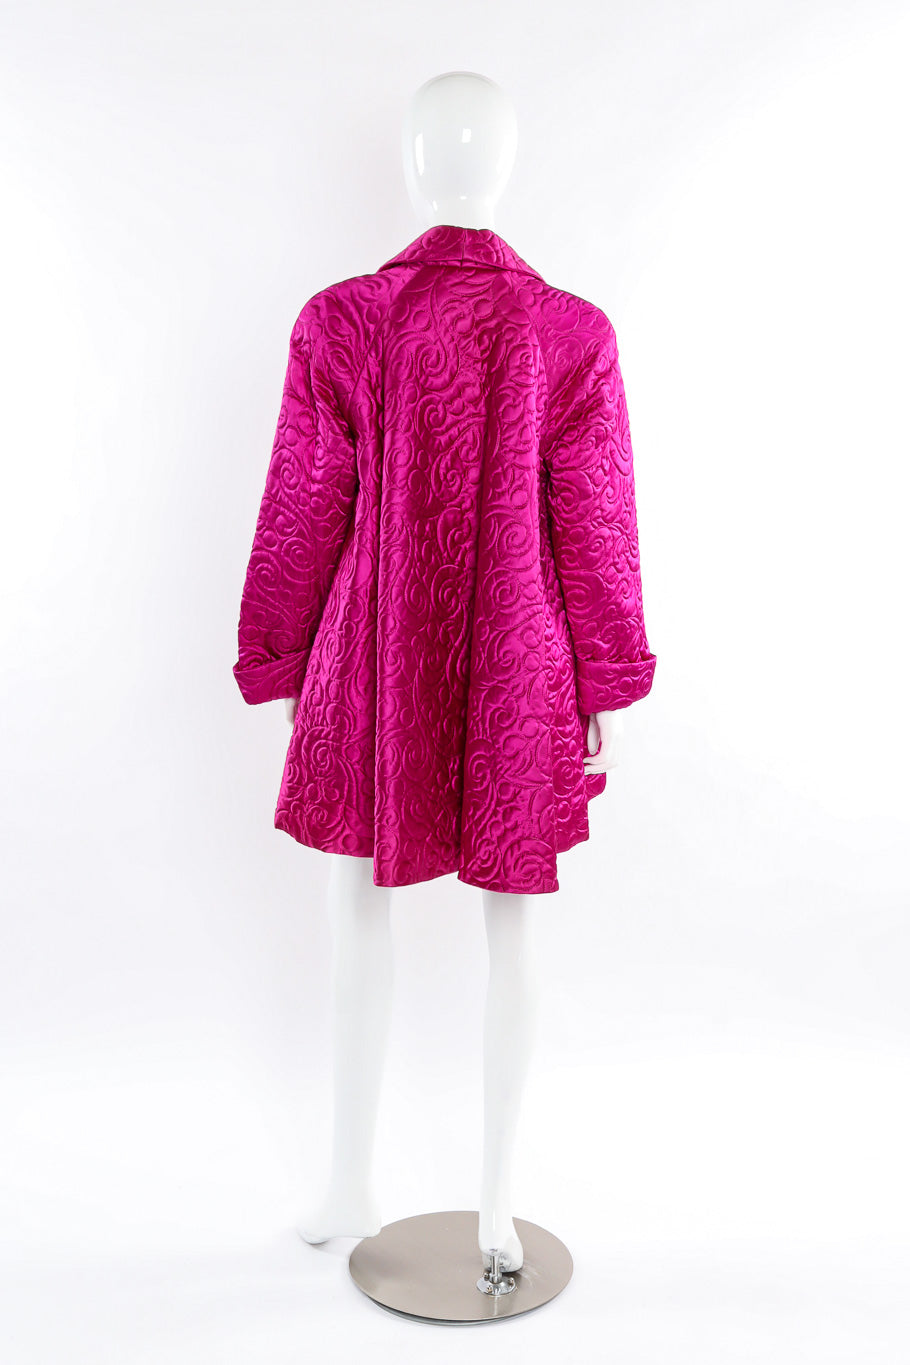 Plush oversized swirl quilted swing coat by Farinae Collection mannequin back view @recessla